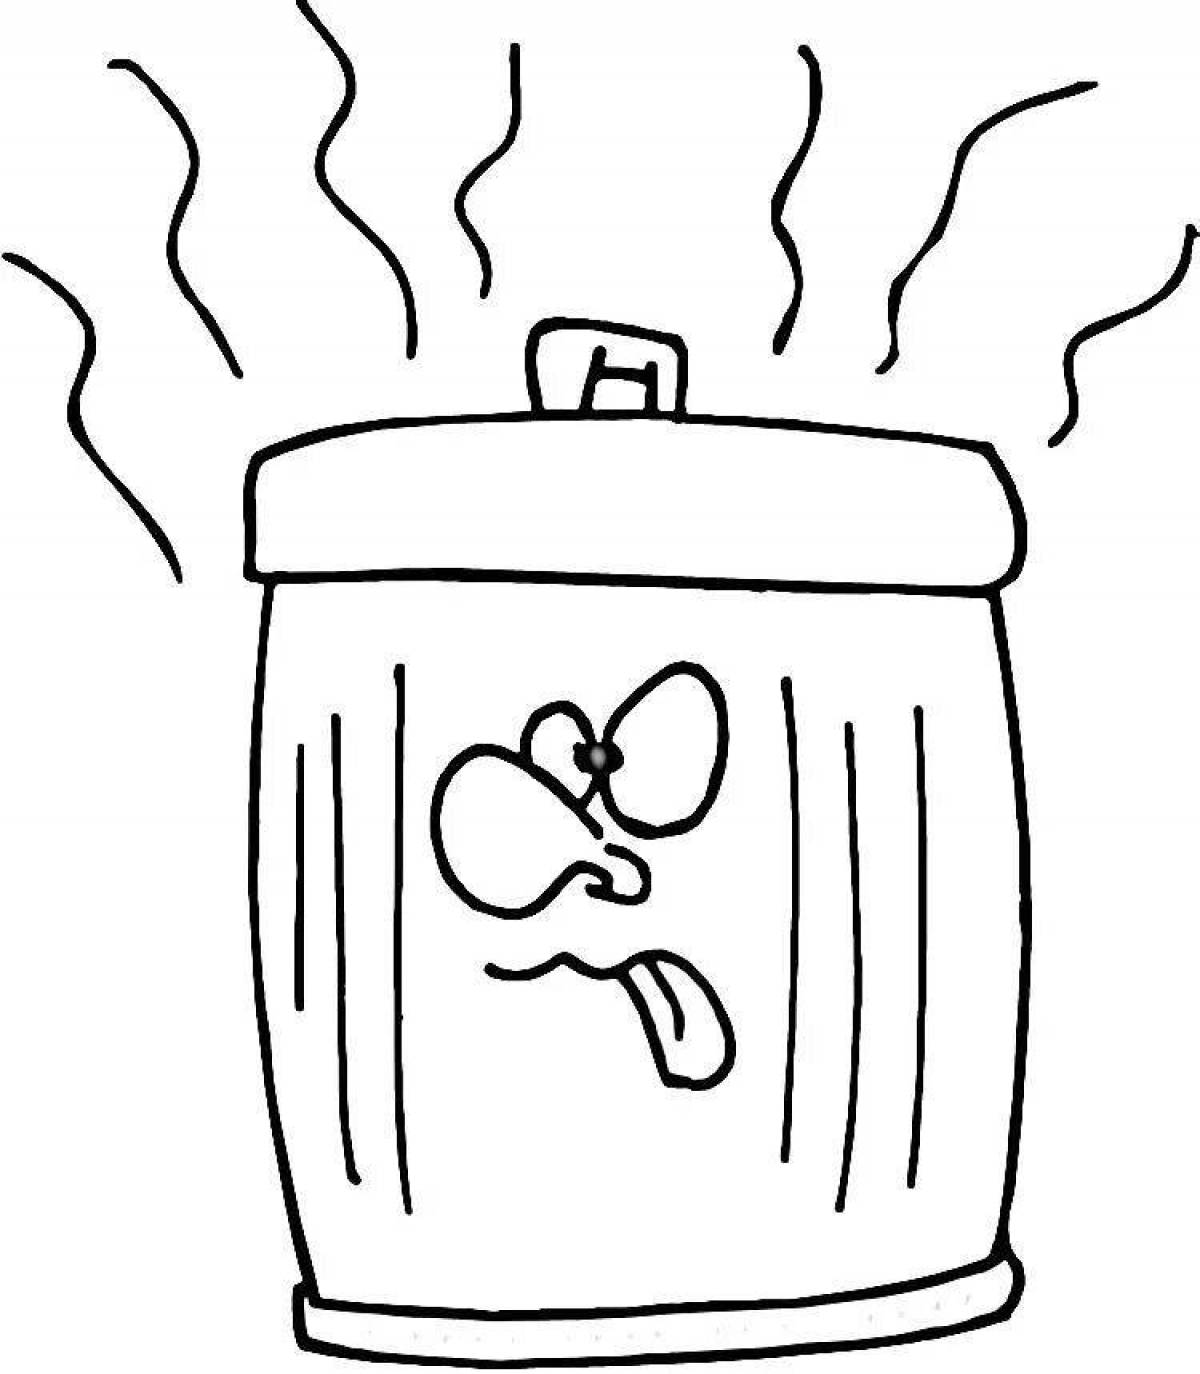 Witty trash can coloring page